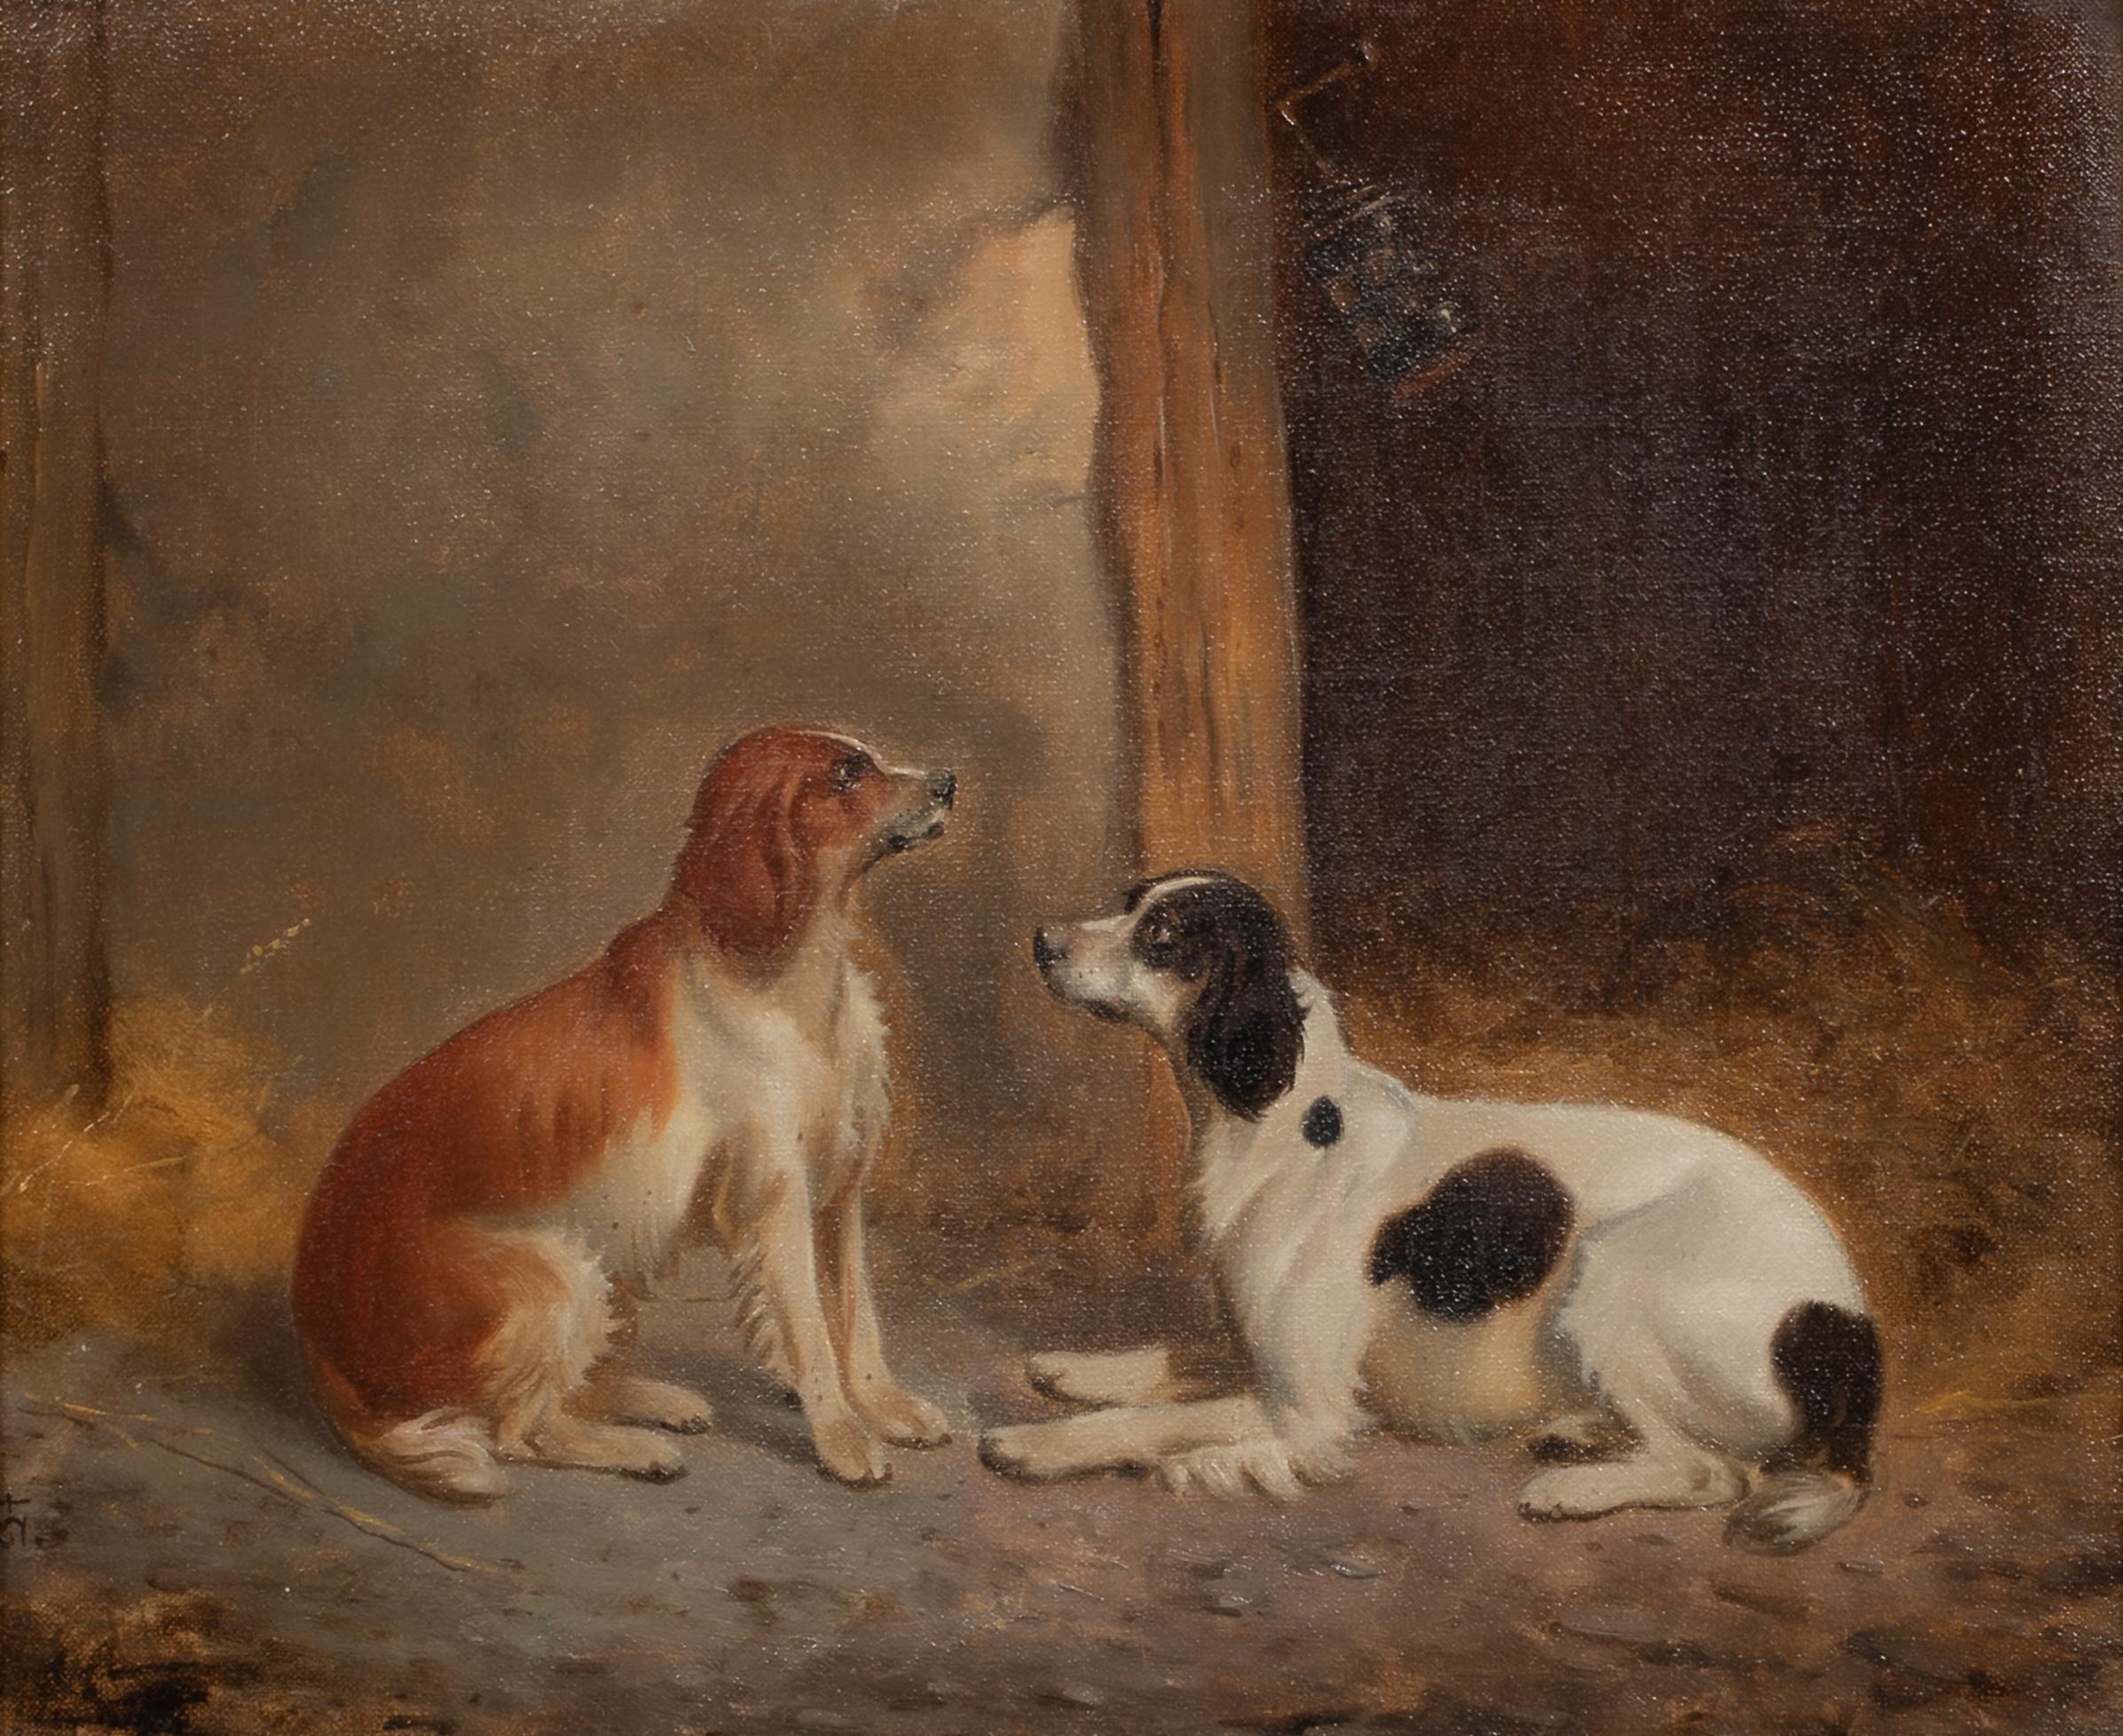 Portrait Of An English & A Welsh Spaniel In A barn, 19th Century  - Brown Portrait Painting by Unknown